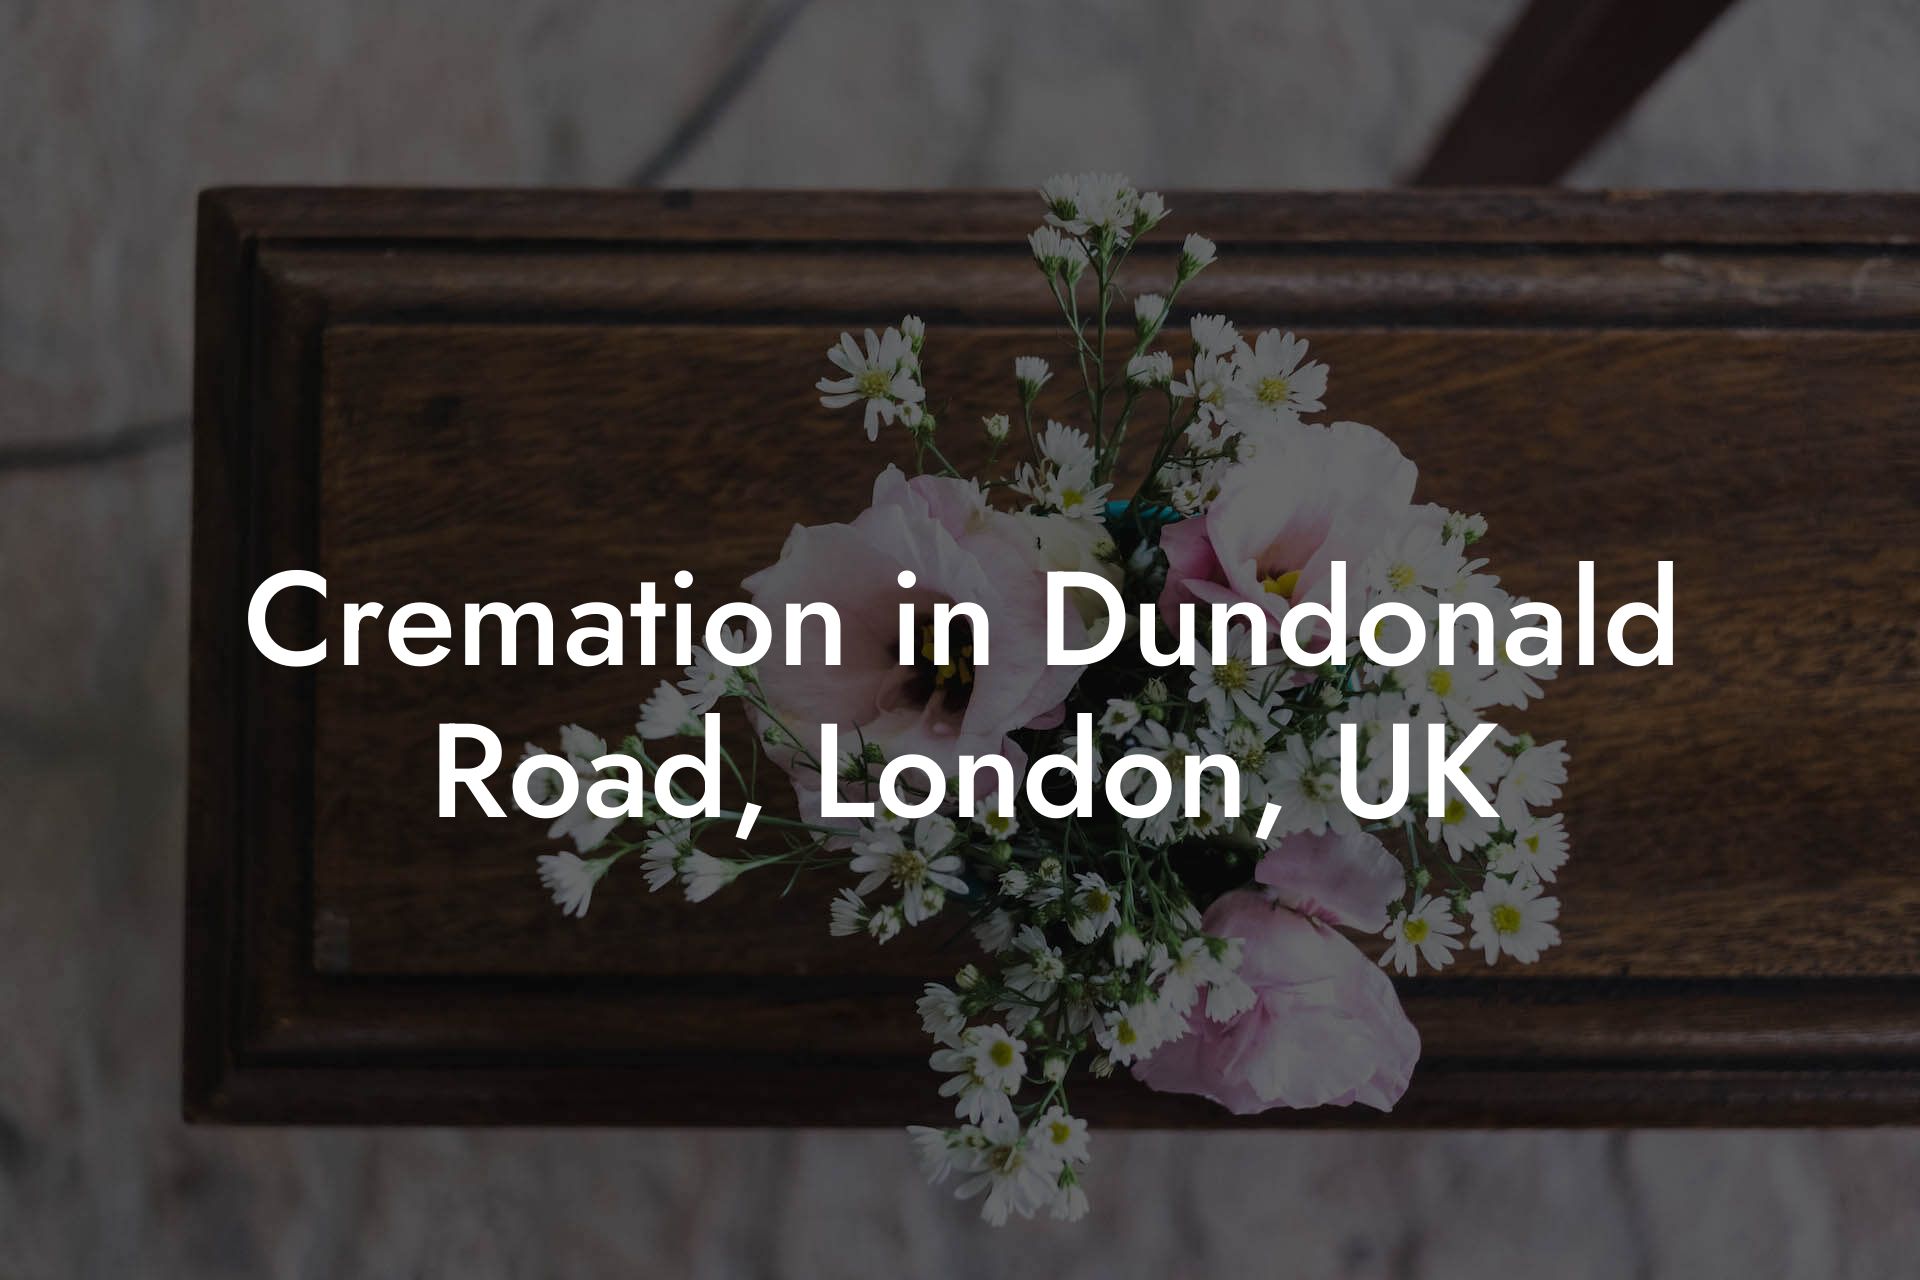 Cremation in Dundonald Road, London, UK